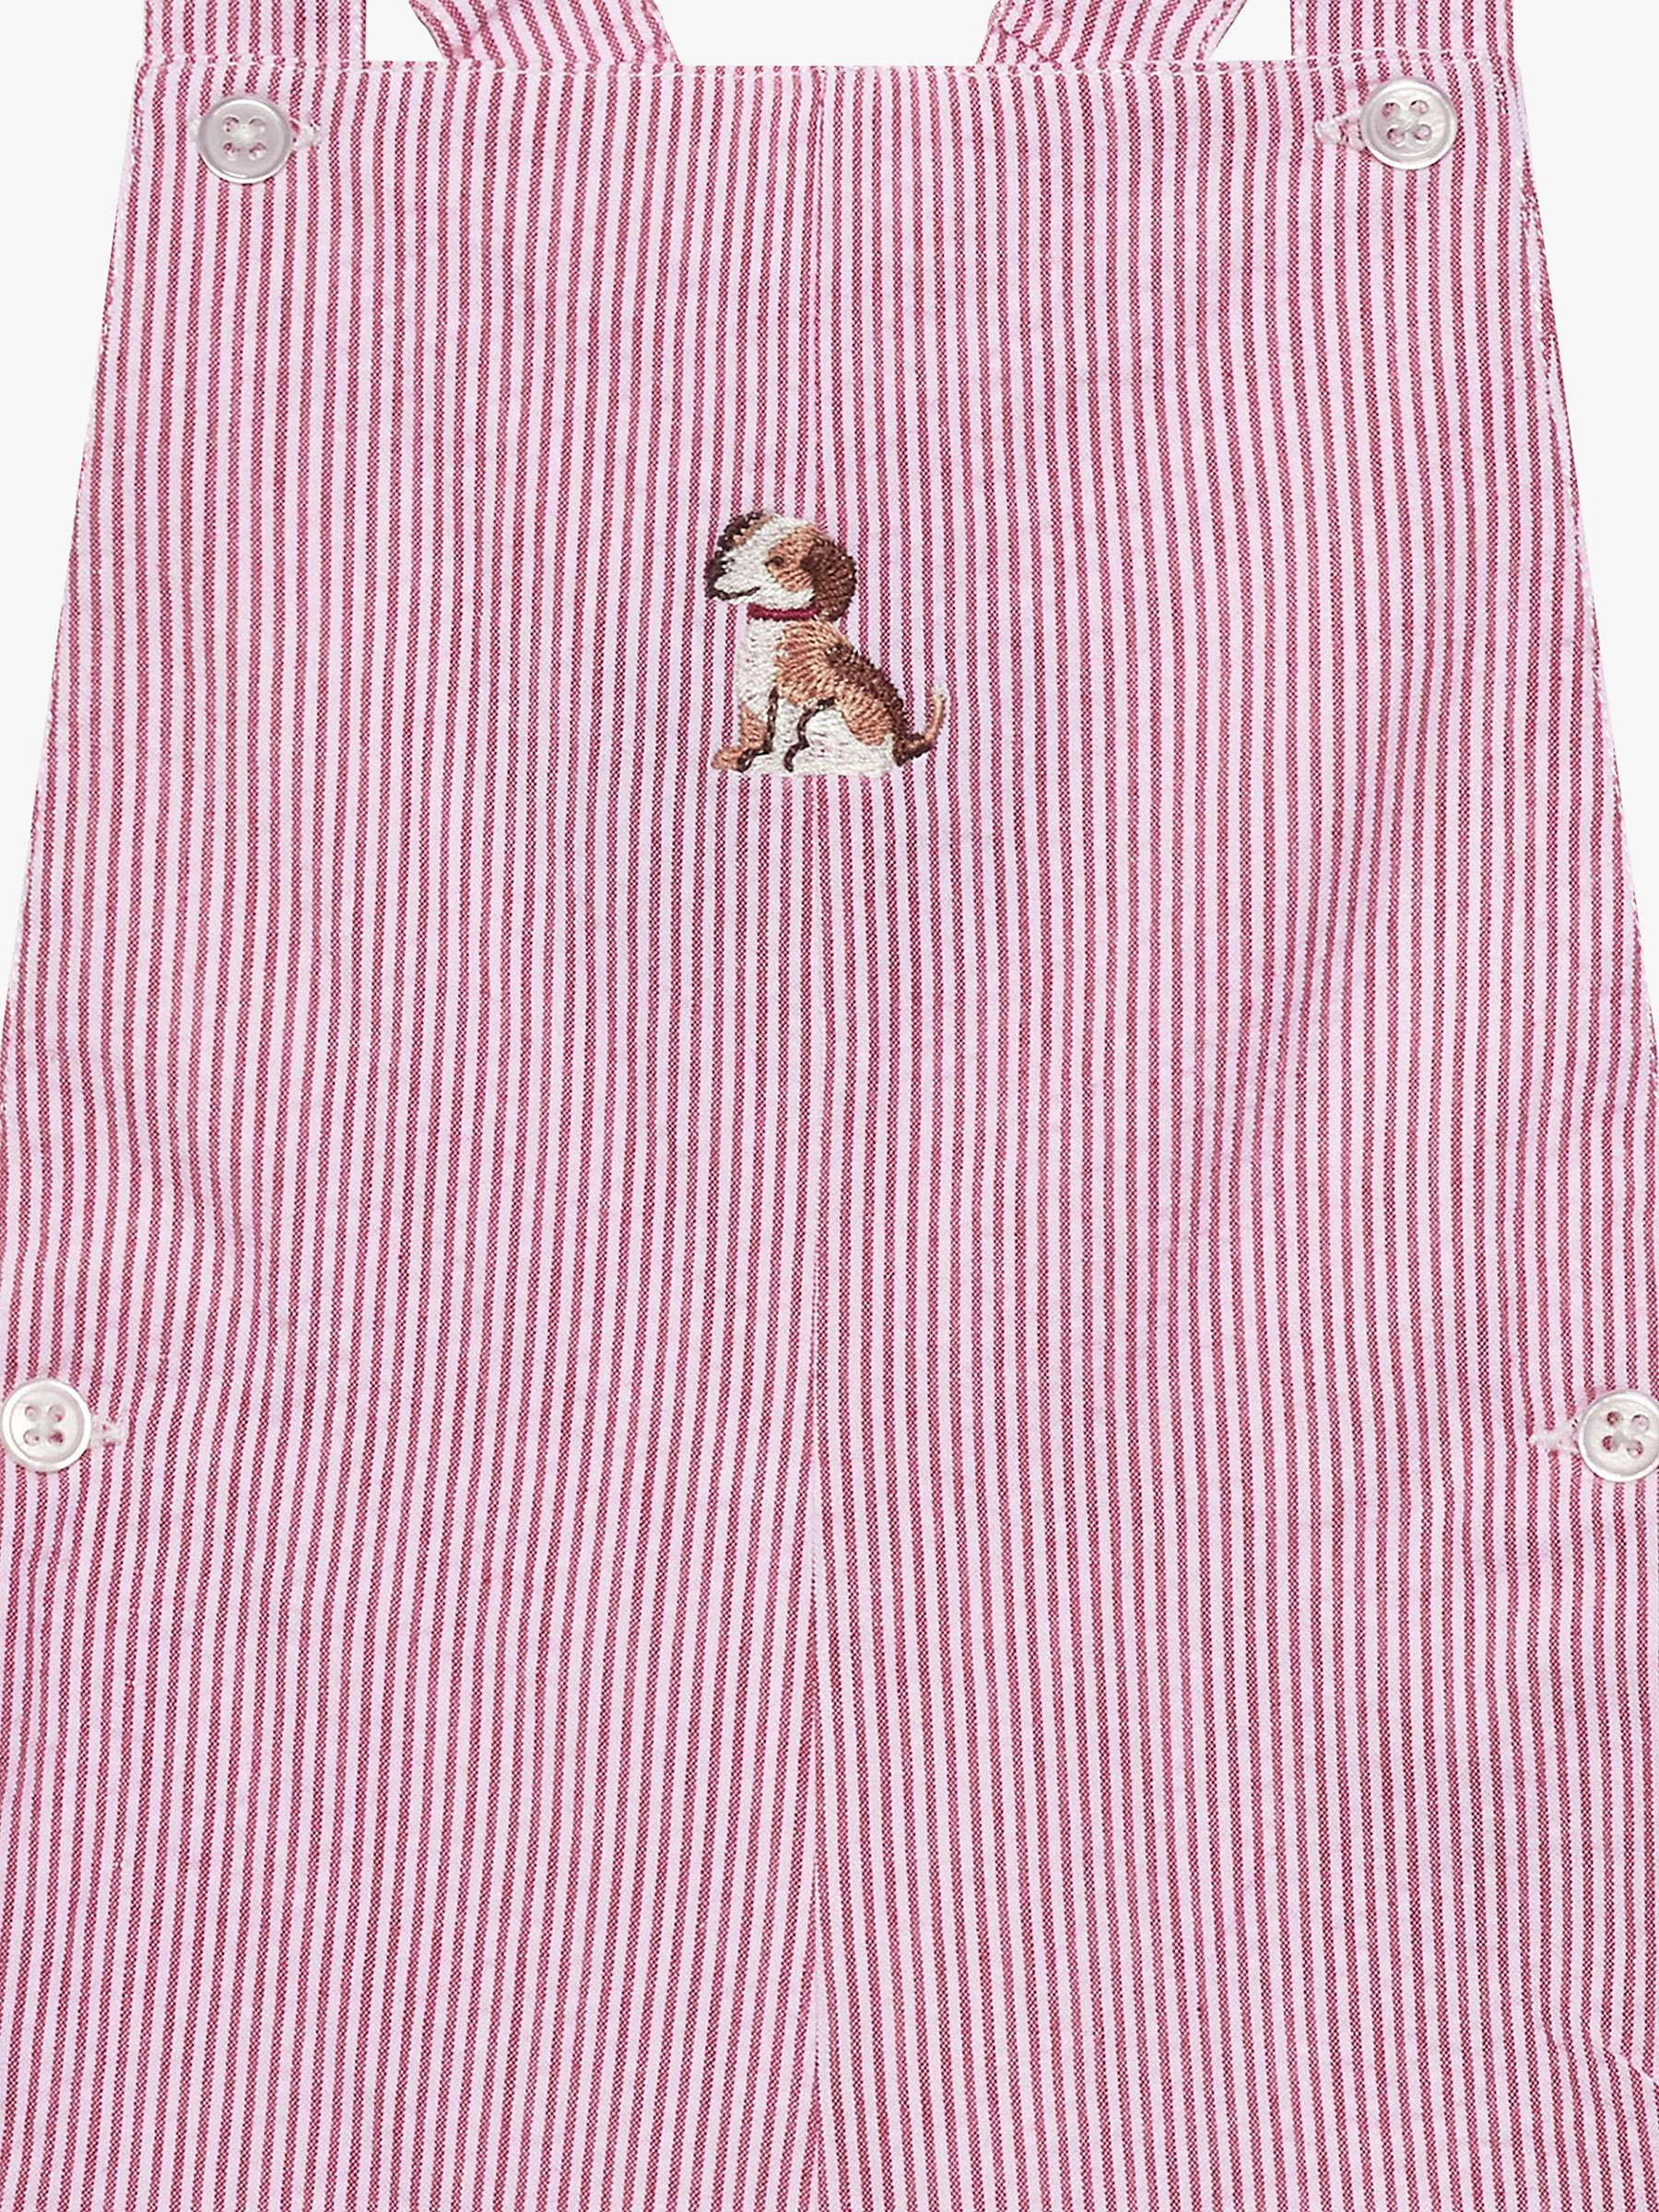 Buy Trotters Baby Stripe Embroidered Puppy Dungaree, Red Online at johnlewis.com